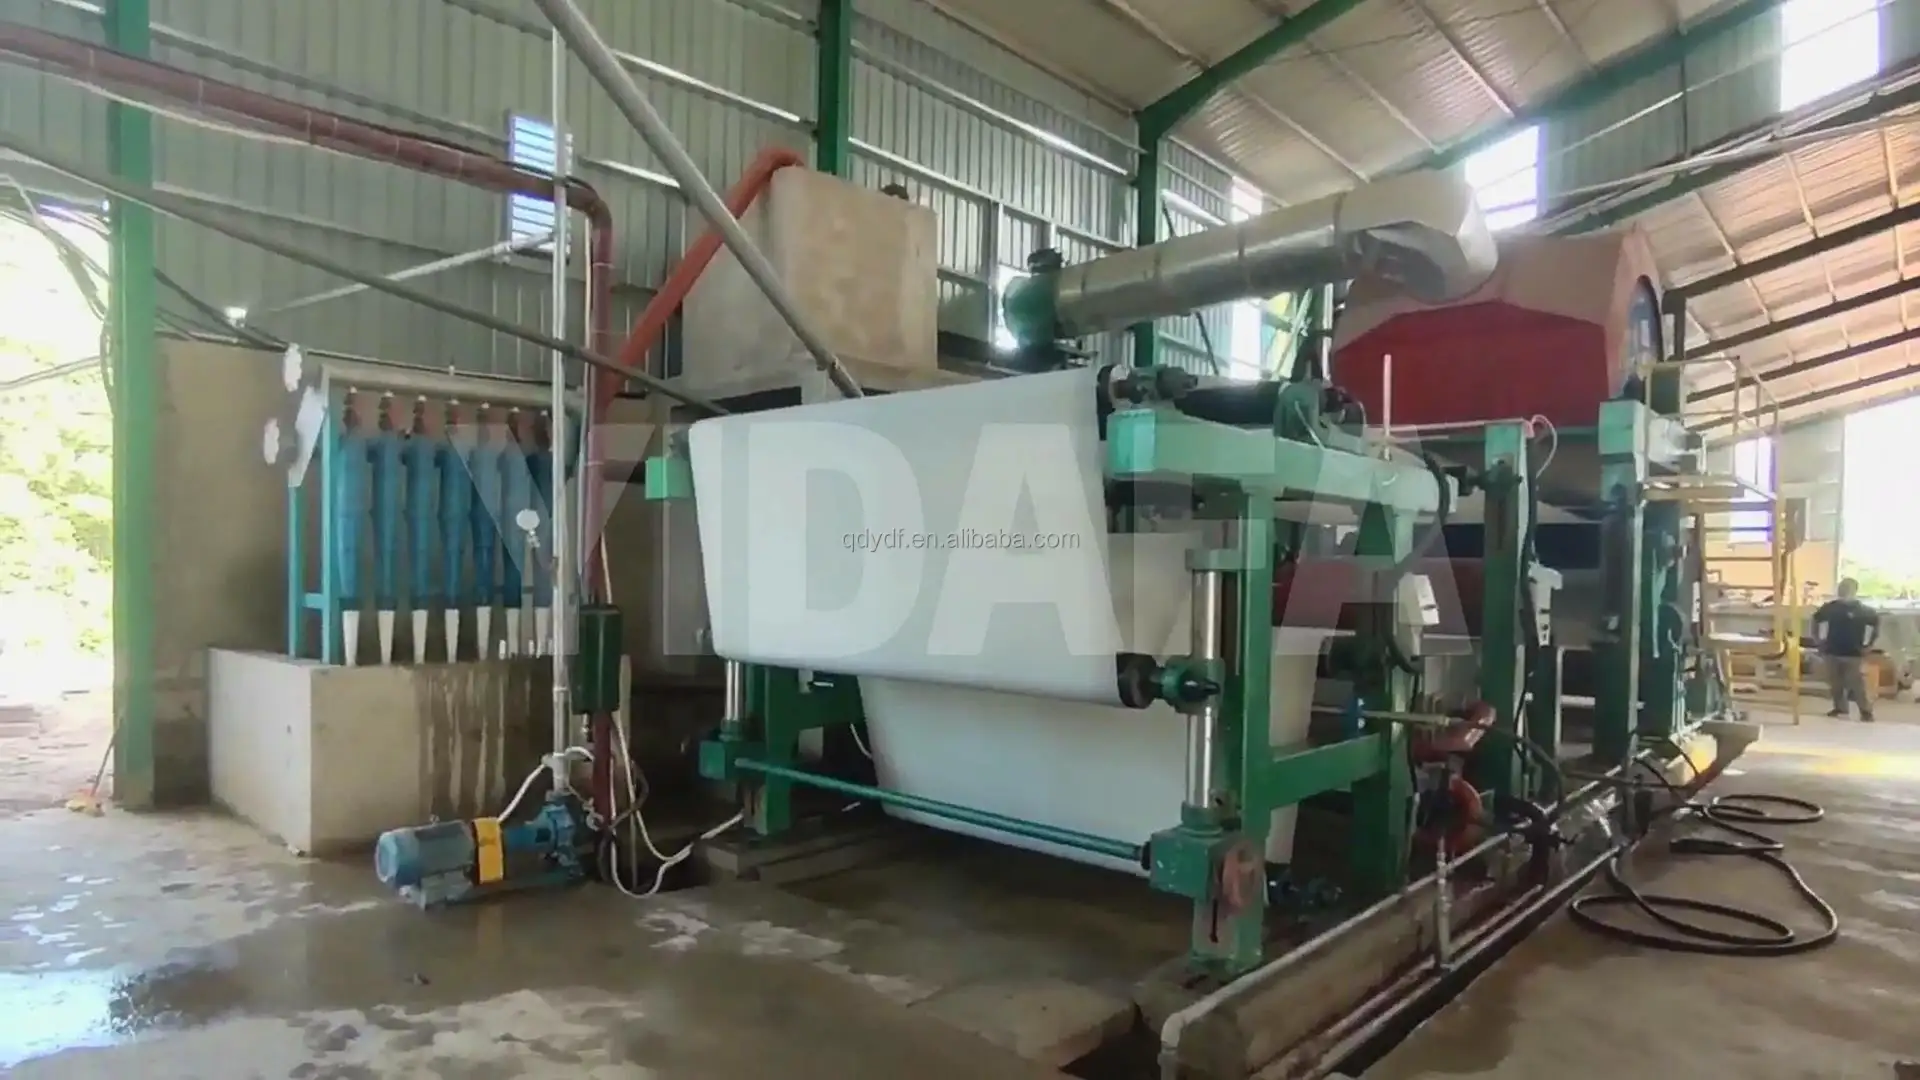 Rice Straw Bamboo Pulp Machines Making Tissues Paper